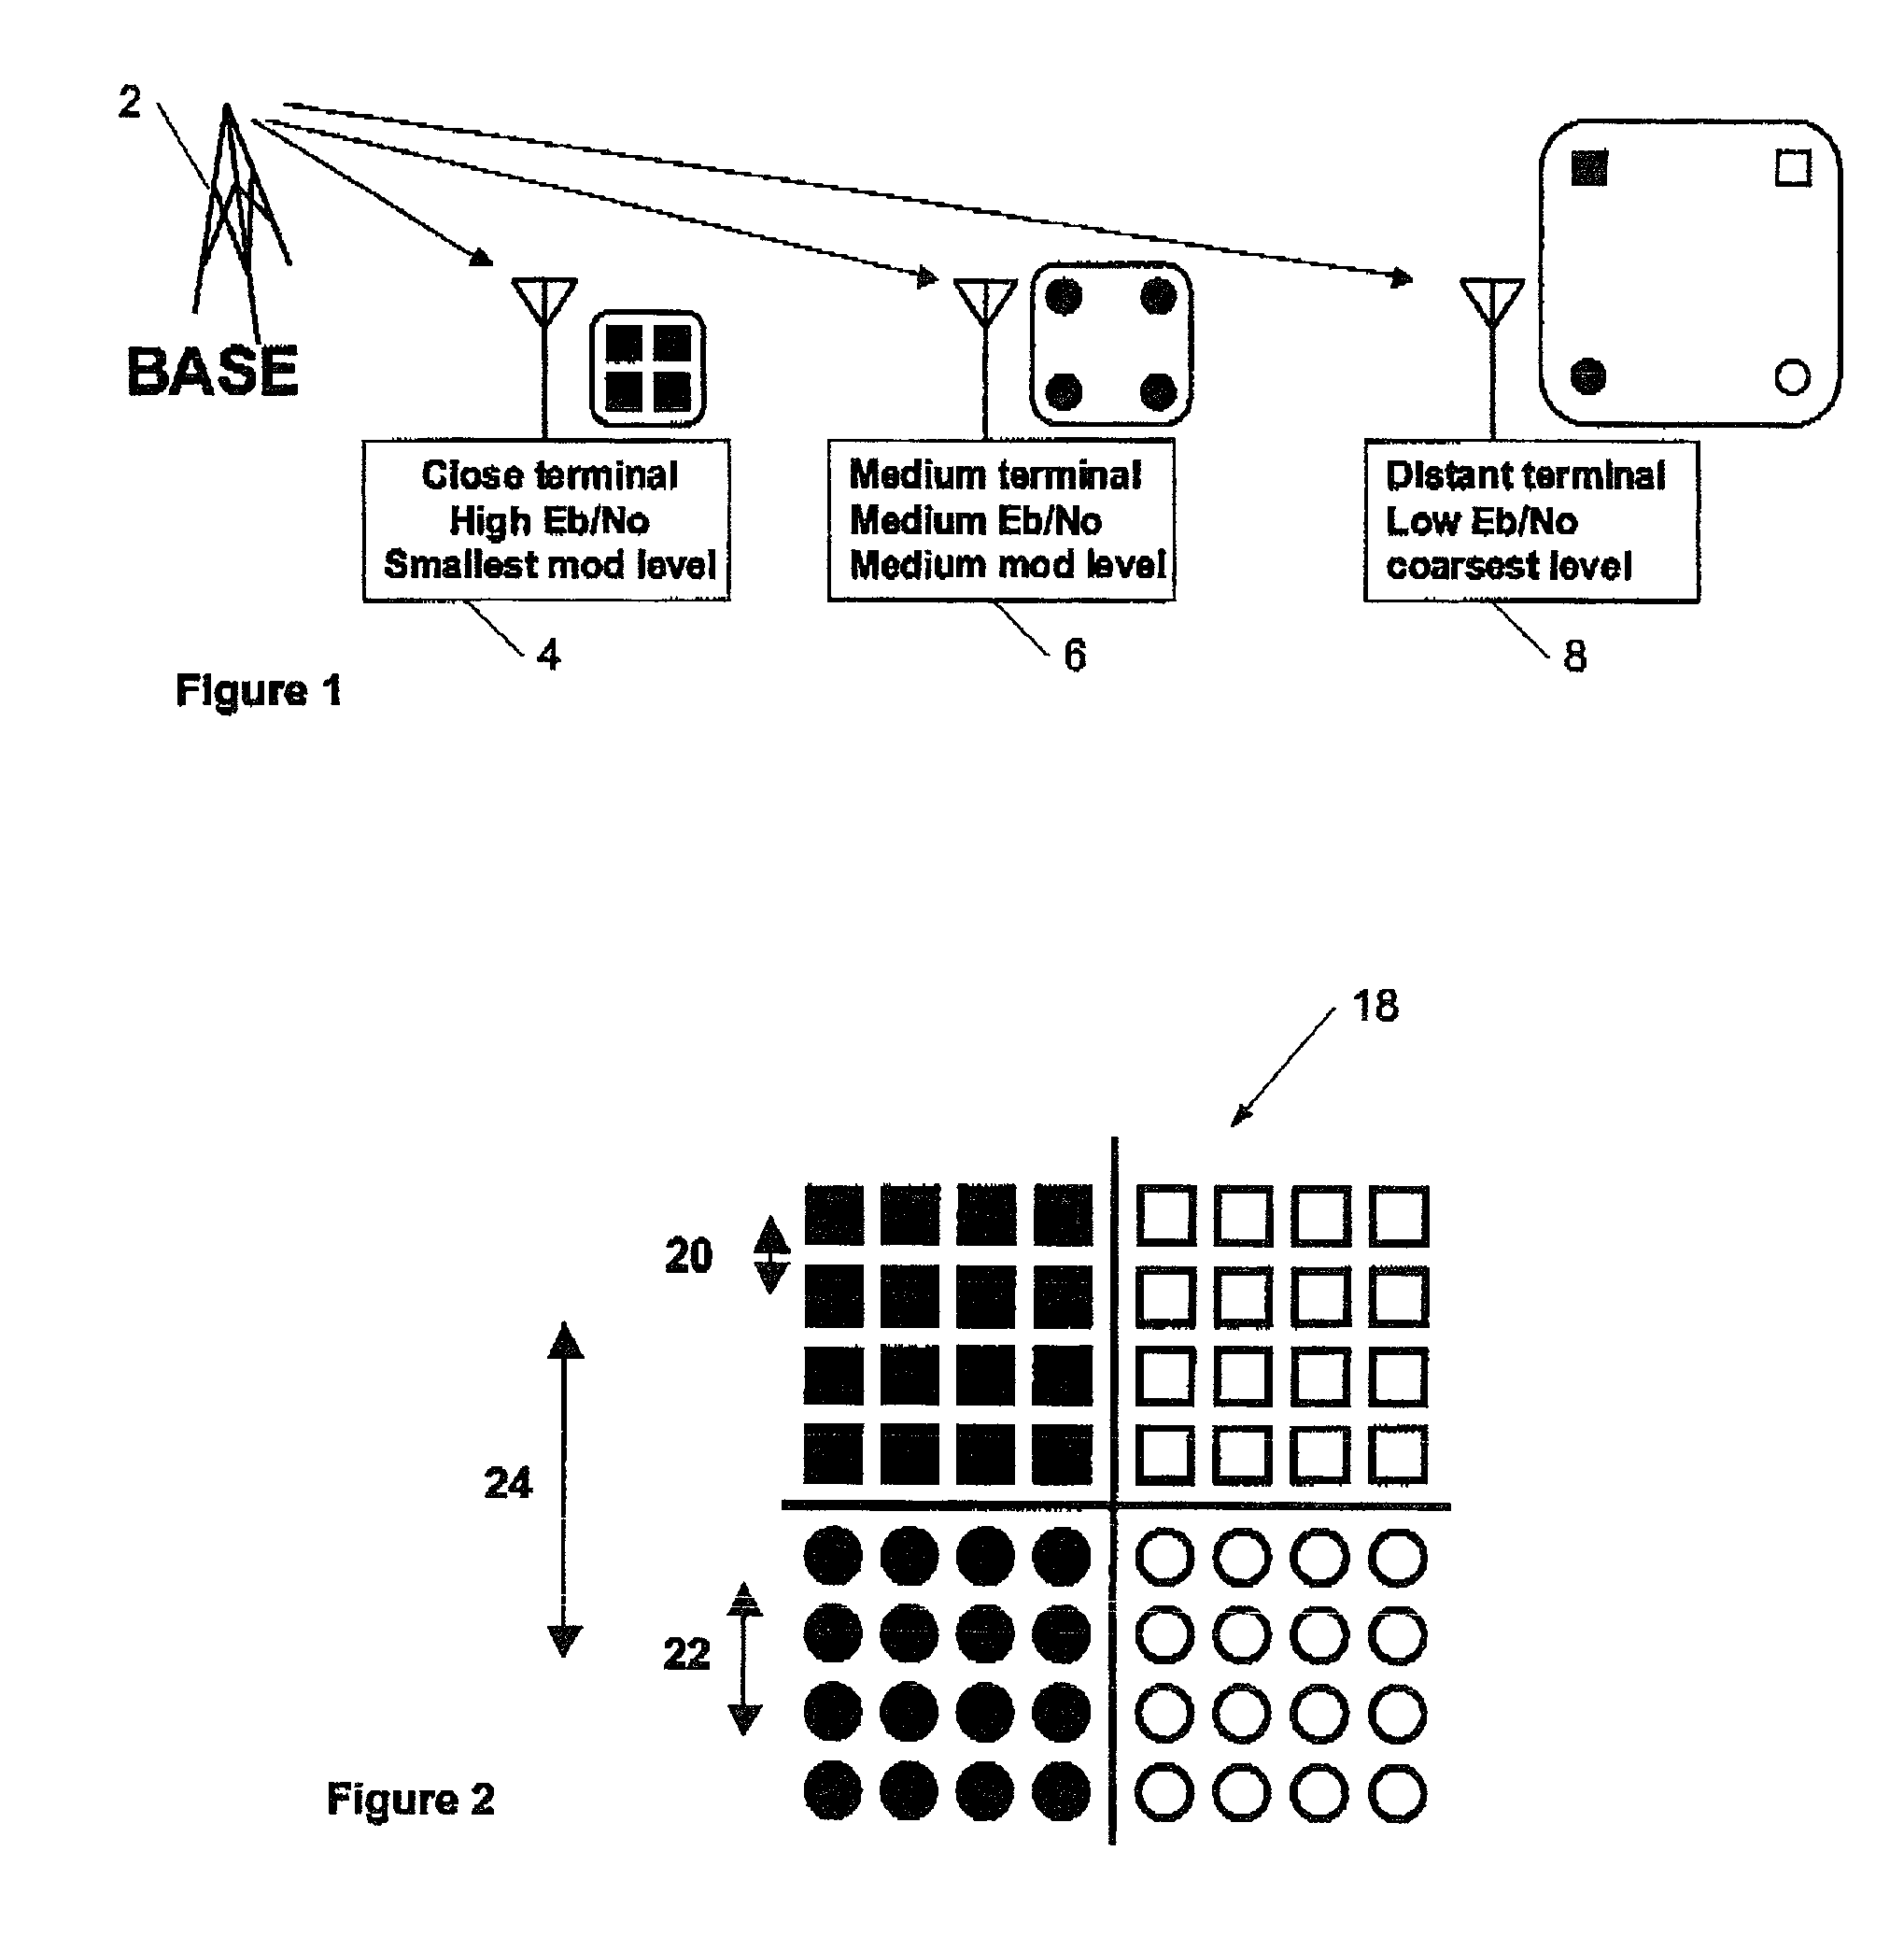 Methods and apparatus for transmitting and receiving data over a communications network in the presence of noise